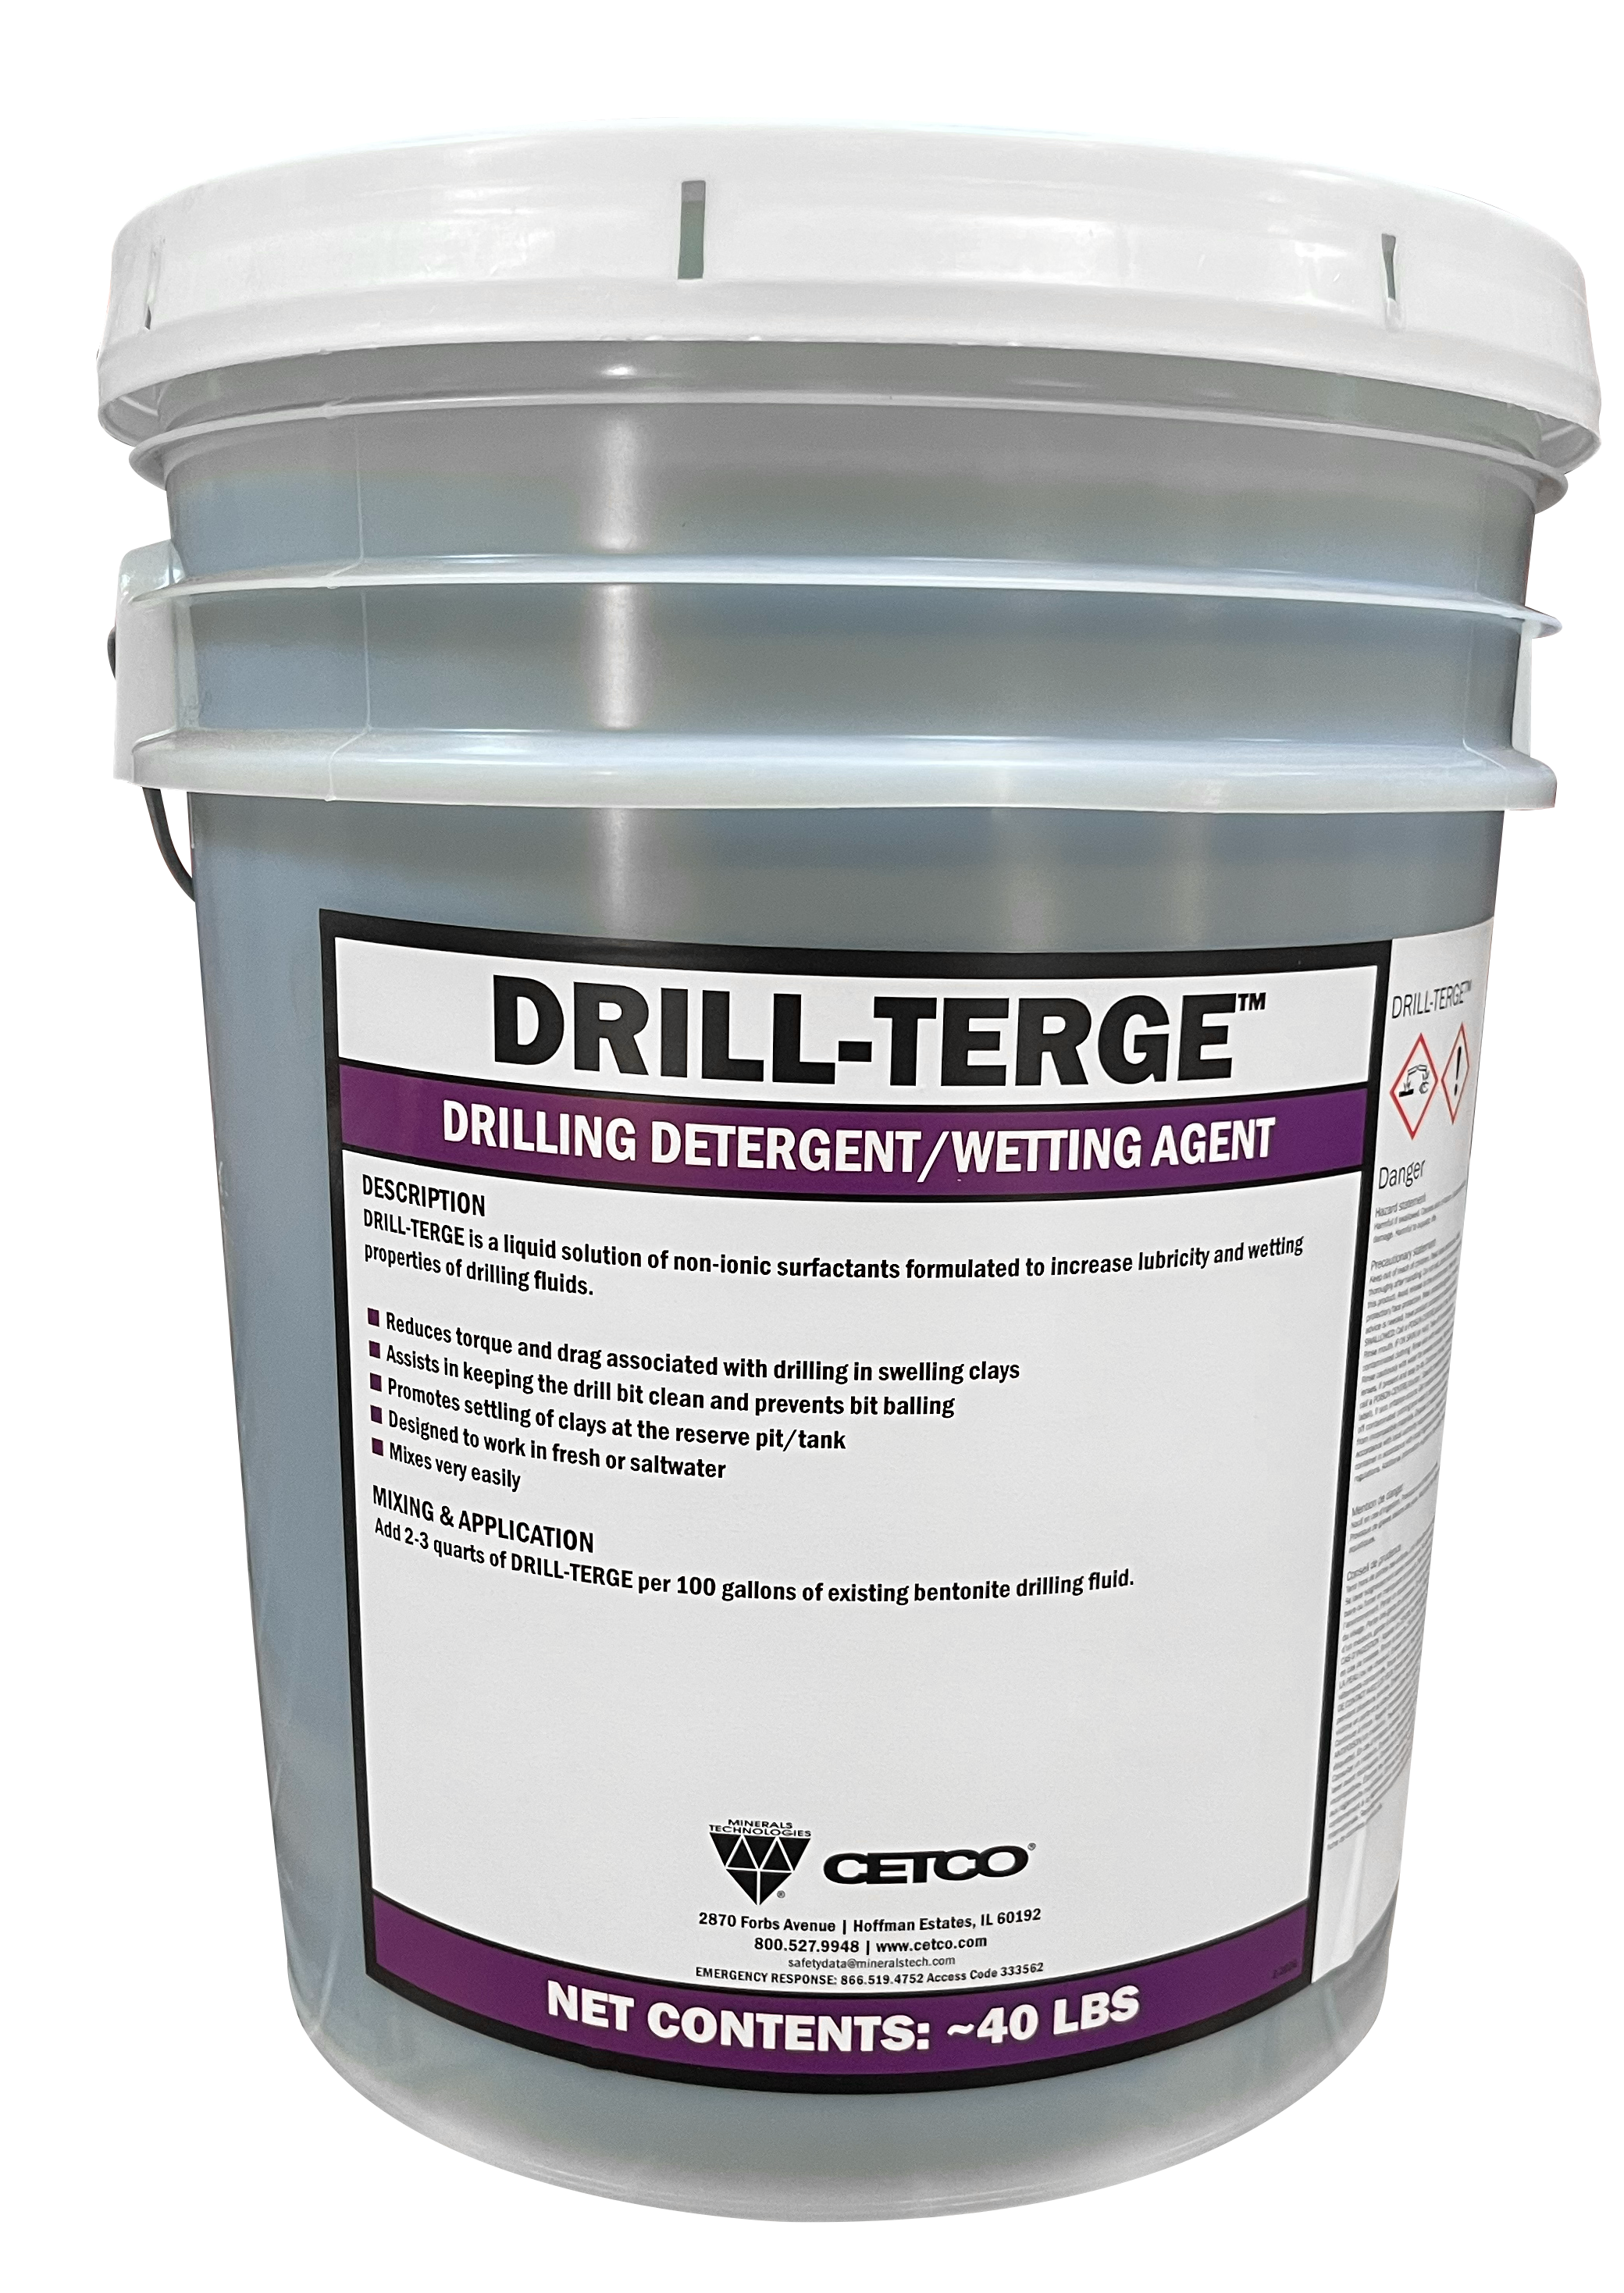 DRILL-TERGE-Drilling Detergent/Wetting Agent 45LB Pail 36/Pallet